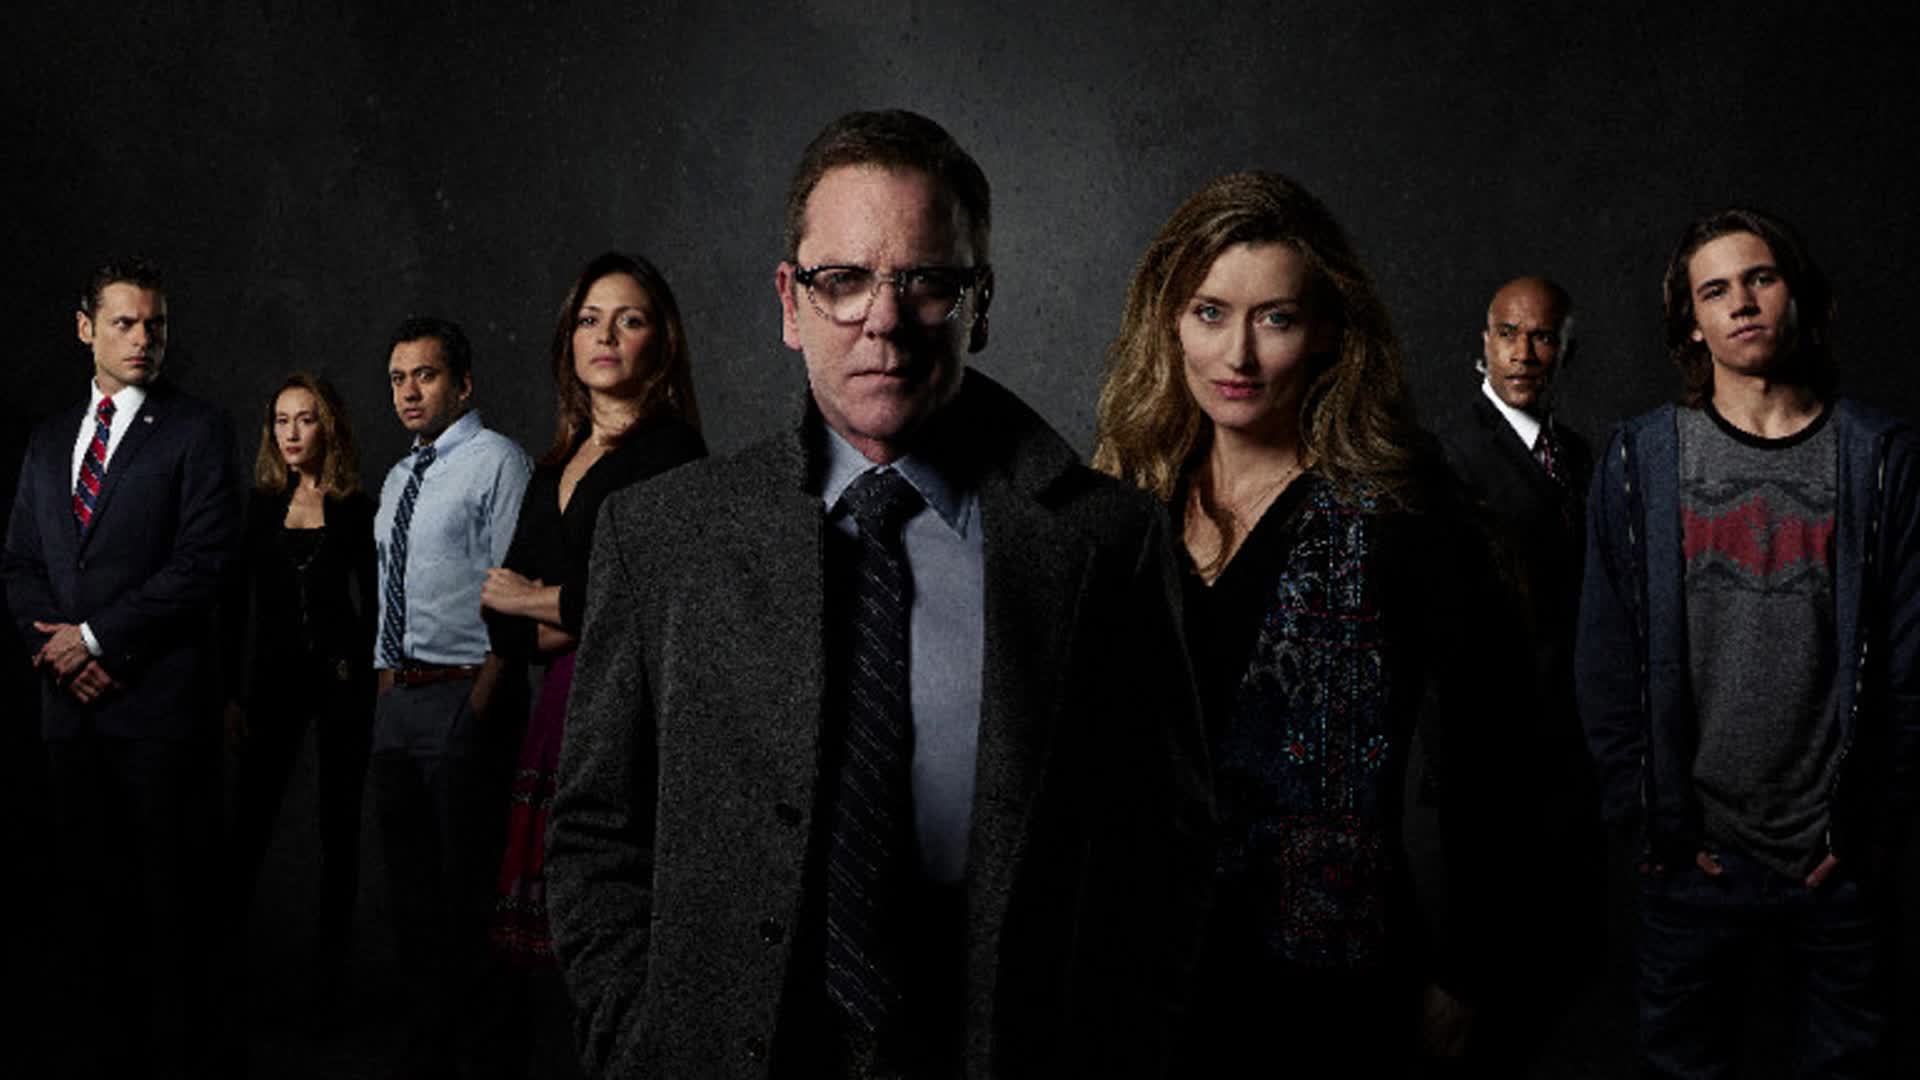 Inside Scoop: Why Netflix and ABC Both Cancelled 'Designated Survivor' – The Drama Behind the Drama!